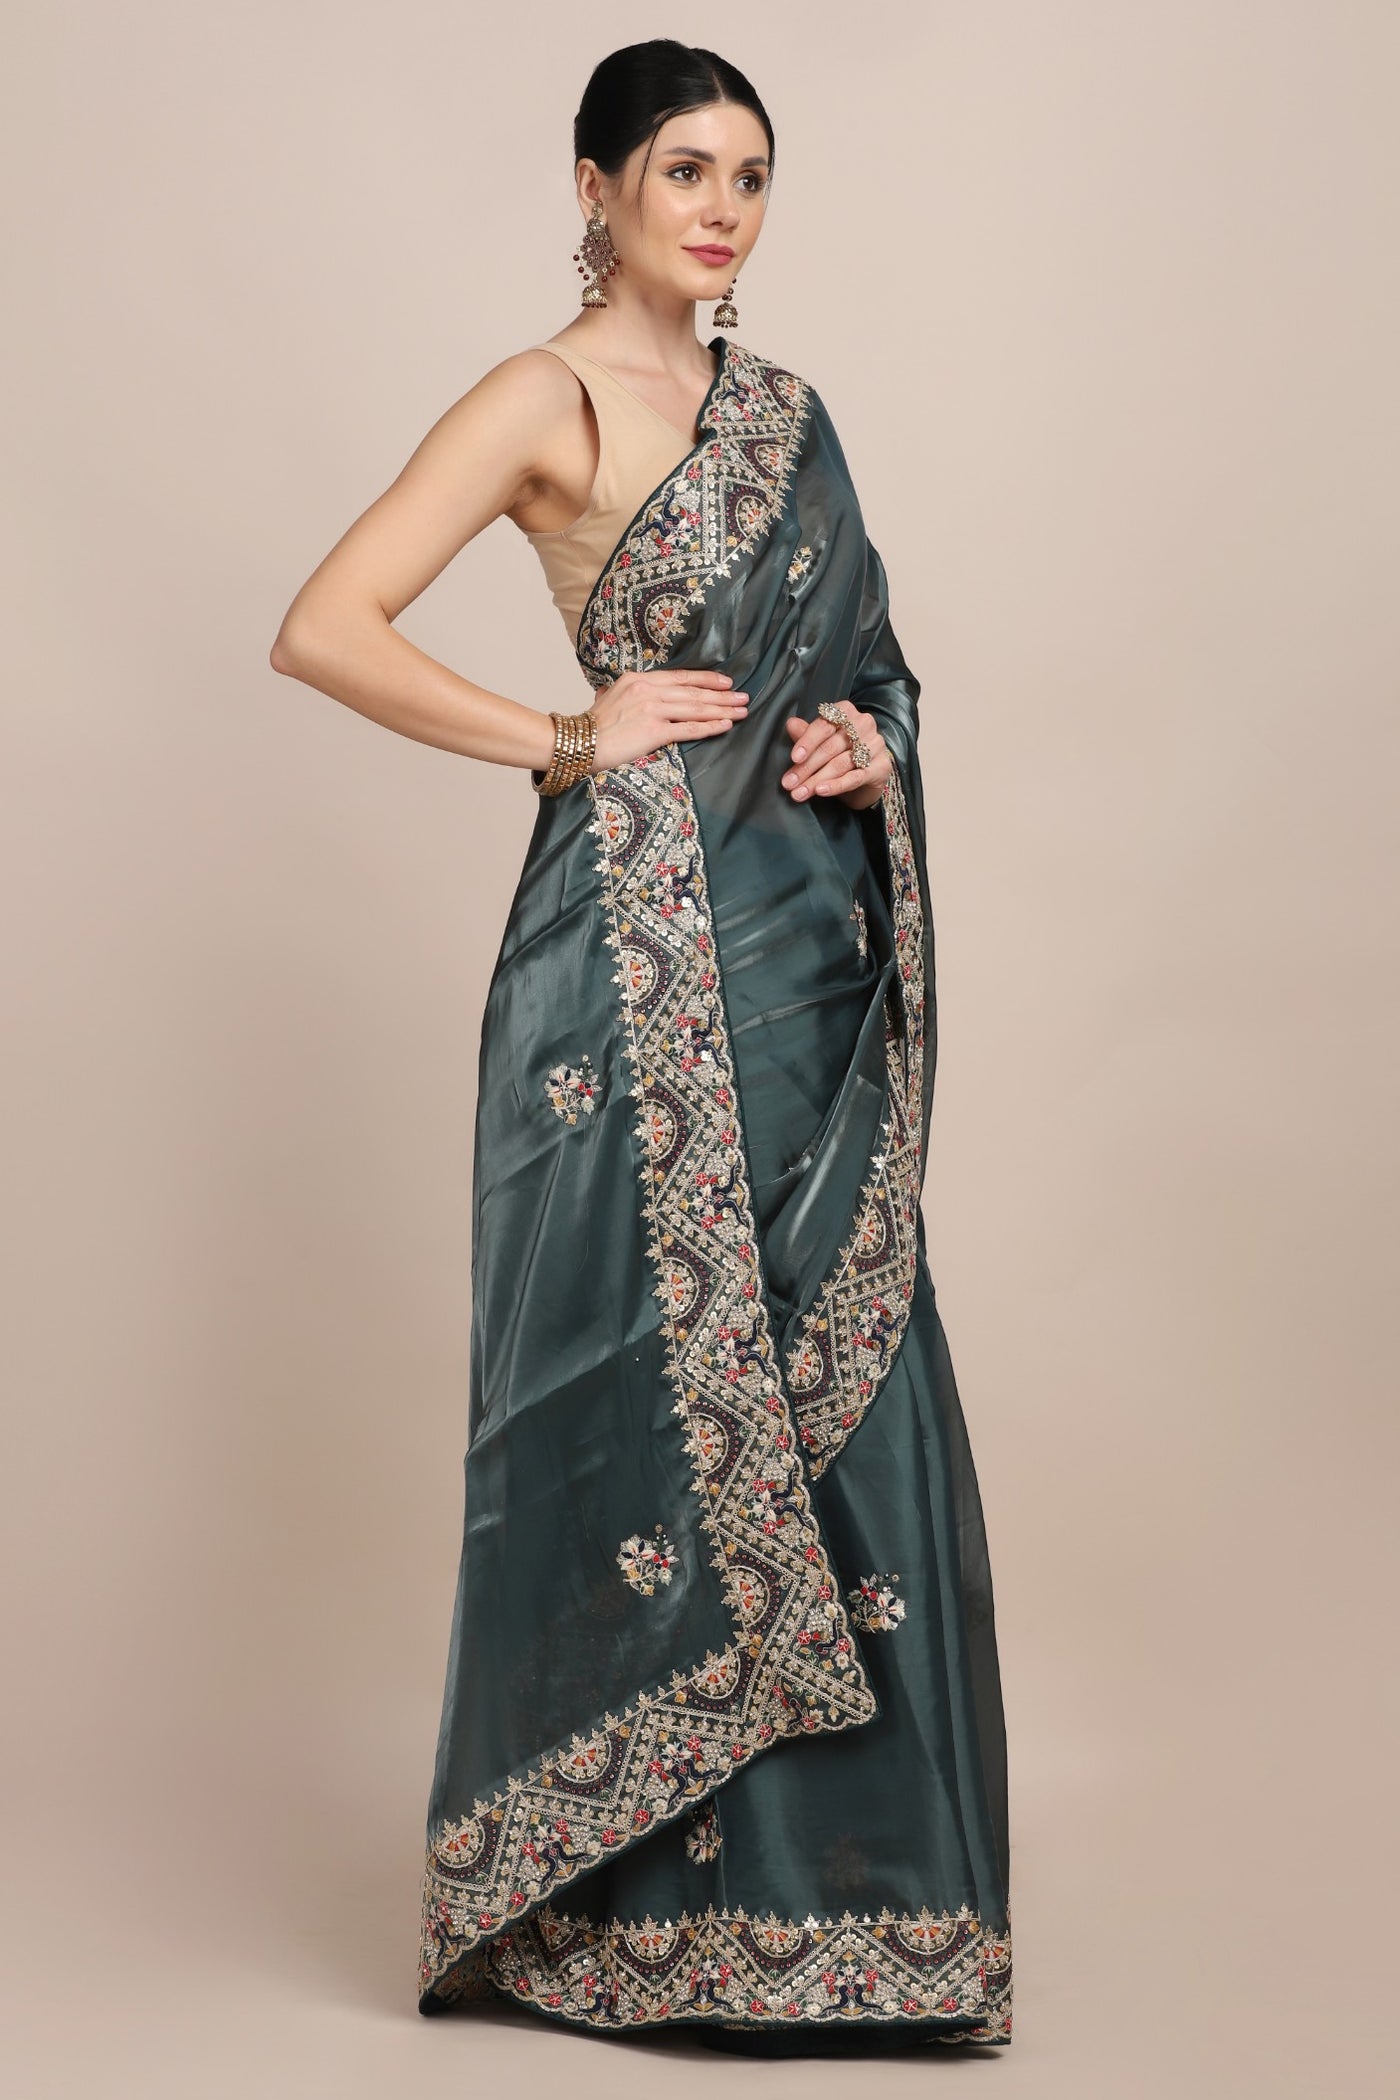 Beautiful bottle green color floral motif embroidered saree